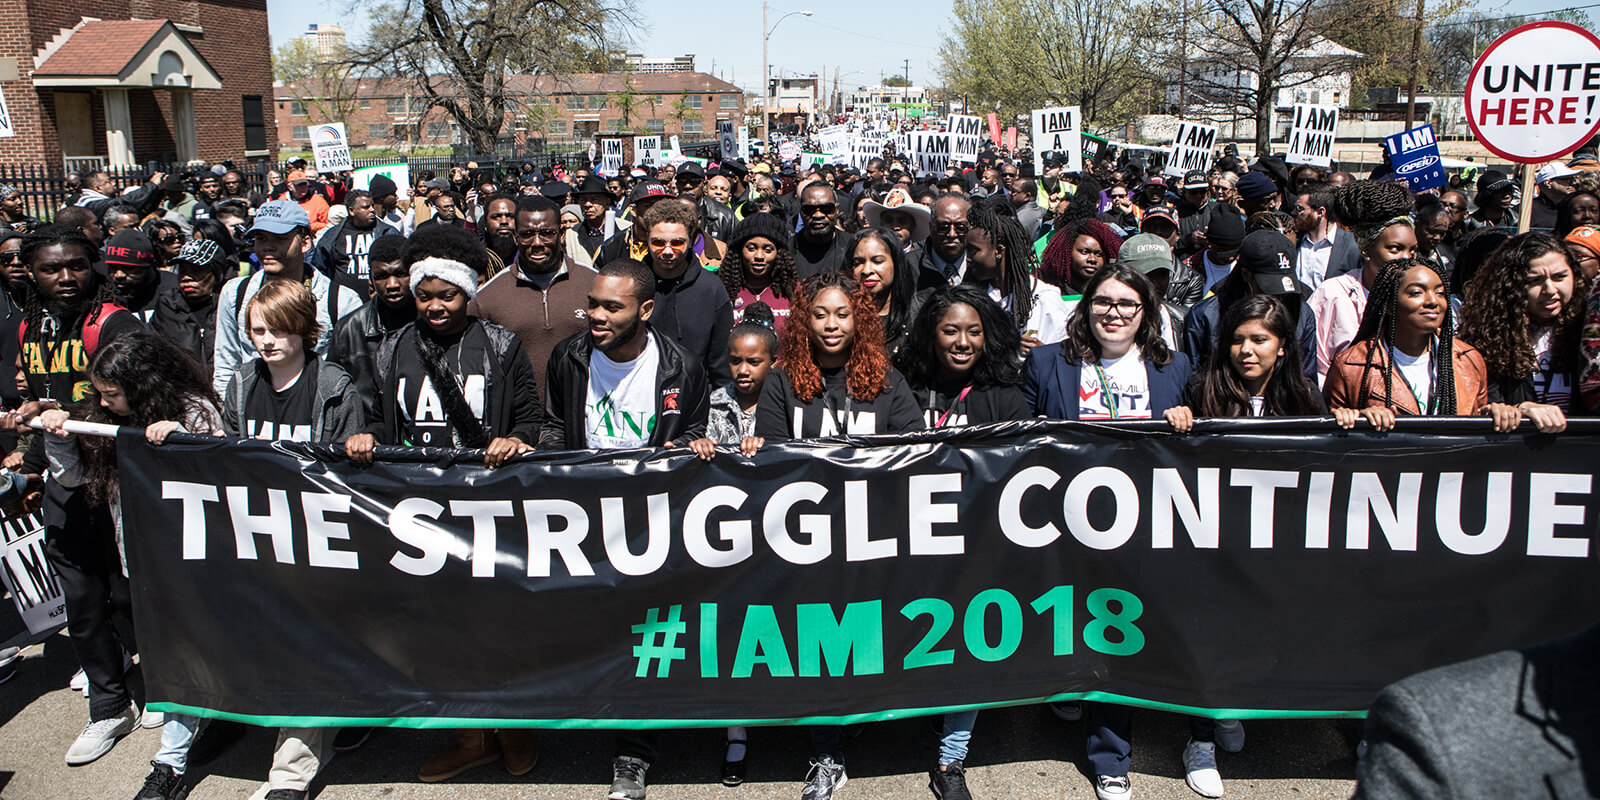 ‘I AM 2018’ Rally Participants Urged to Continue Dr. King’s Struggle